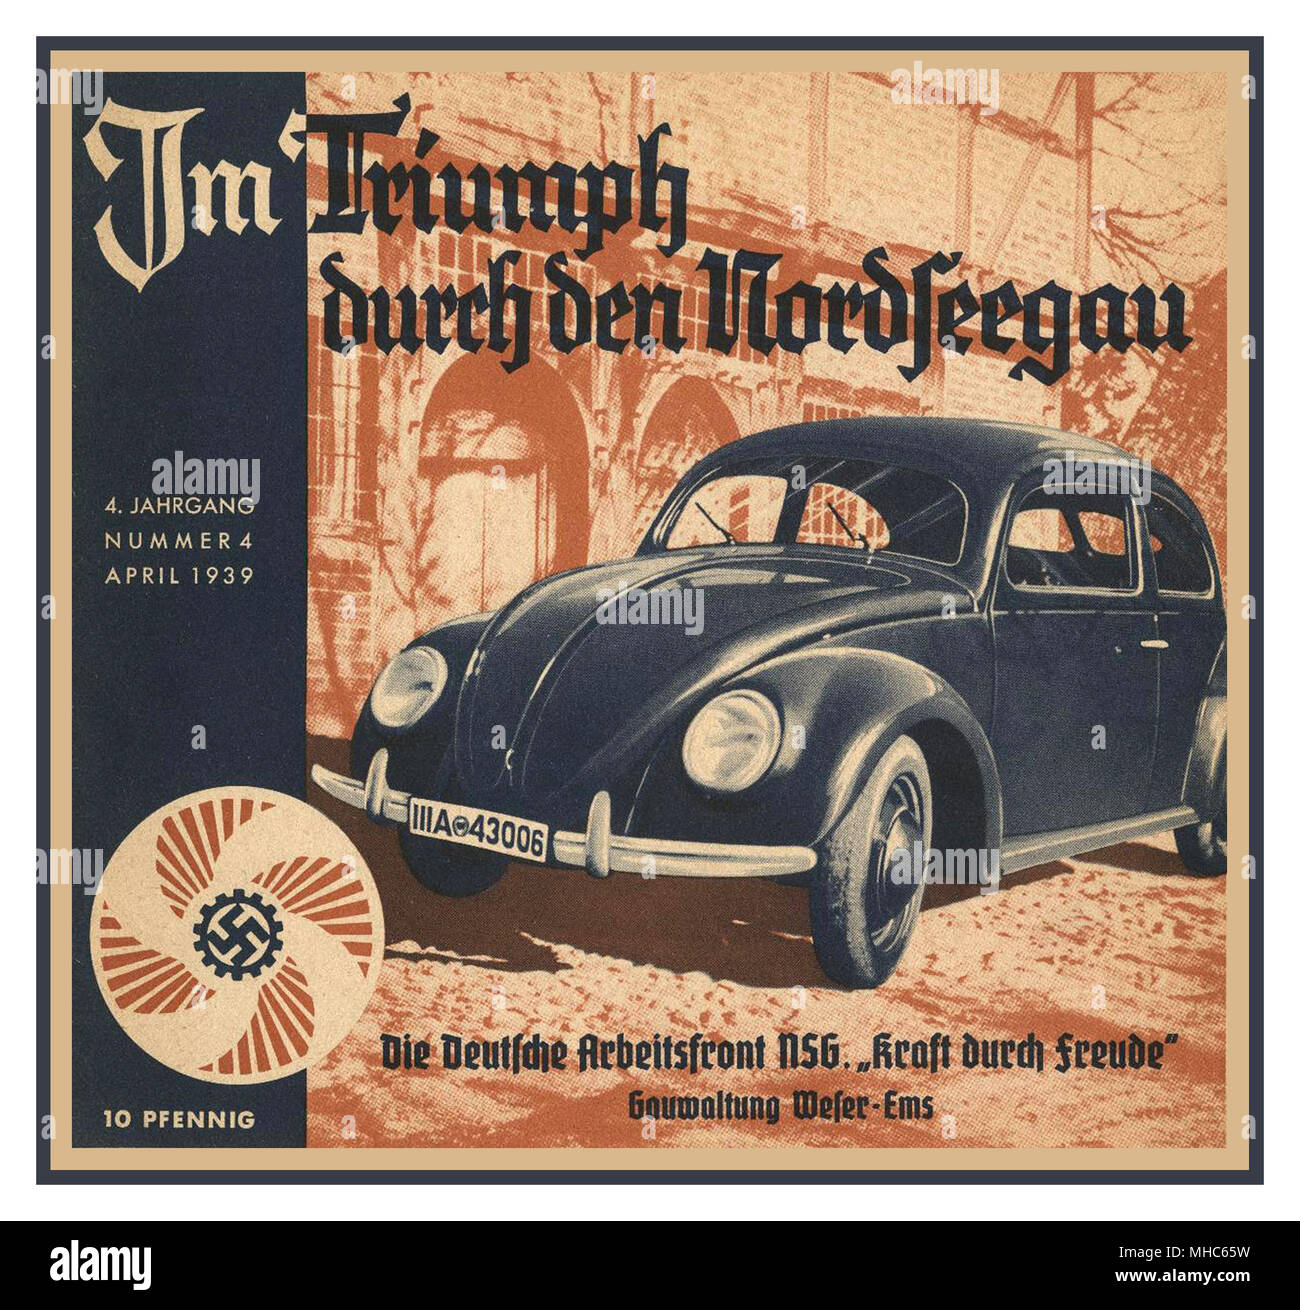 Volkswagen KDF Wagen Nazi Press advertisement with swastika symbol  1939 -' Im Triumph durch den Nordseegau' (In triumph through the North Sea coast) advertisement for the Volkswagen KdF-Wagen (nicknamed Beetle). The car manufacturer, Volkswagen, was part of the German Labour Front's 'Kraft durch Freude', as the name 'KdF' or 'Strength Through Joy' policy, a part of the ideology of 1930's NSDAP Nazi Party Germany Stock Photo